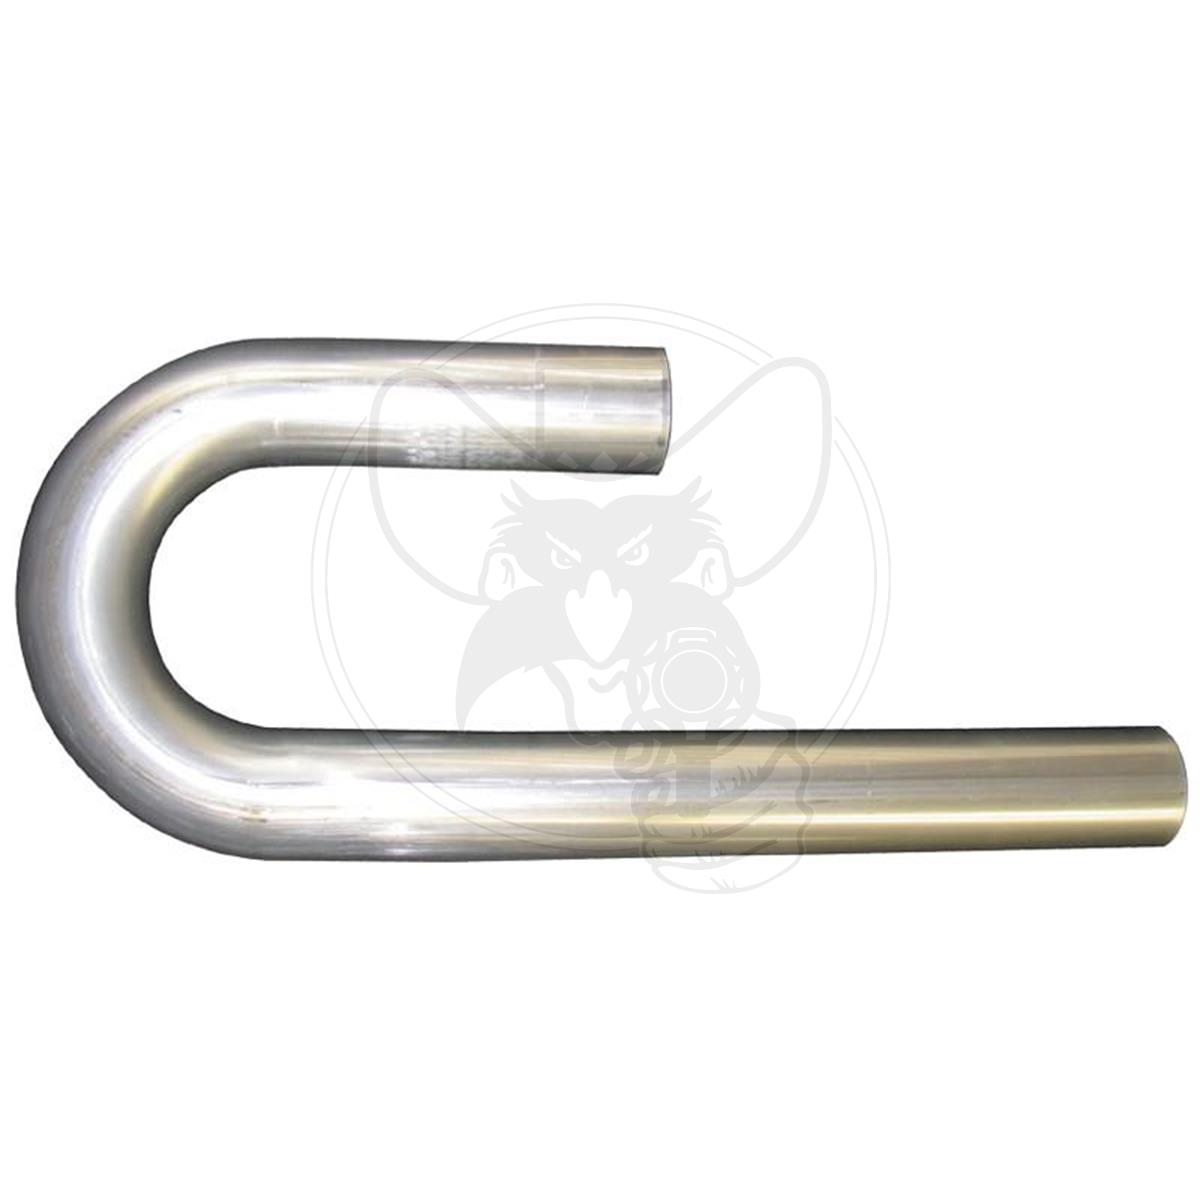 AEROFLOW 180° Stainless J-Bend Tubing 1-3/4" OD WITH 6" & 12" LEGS